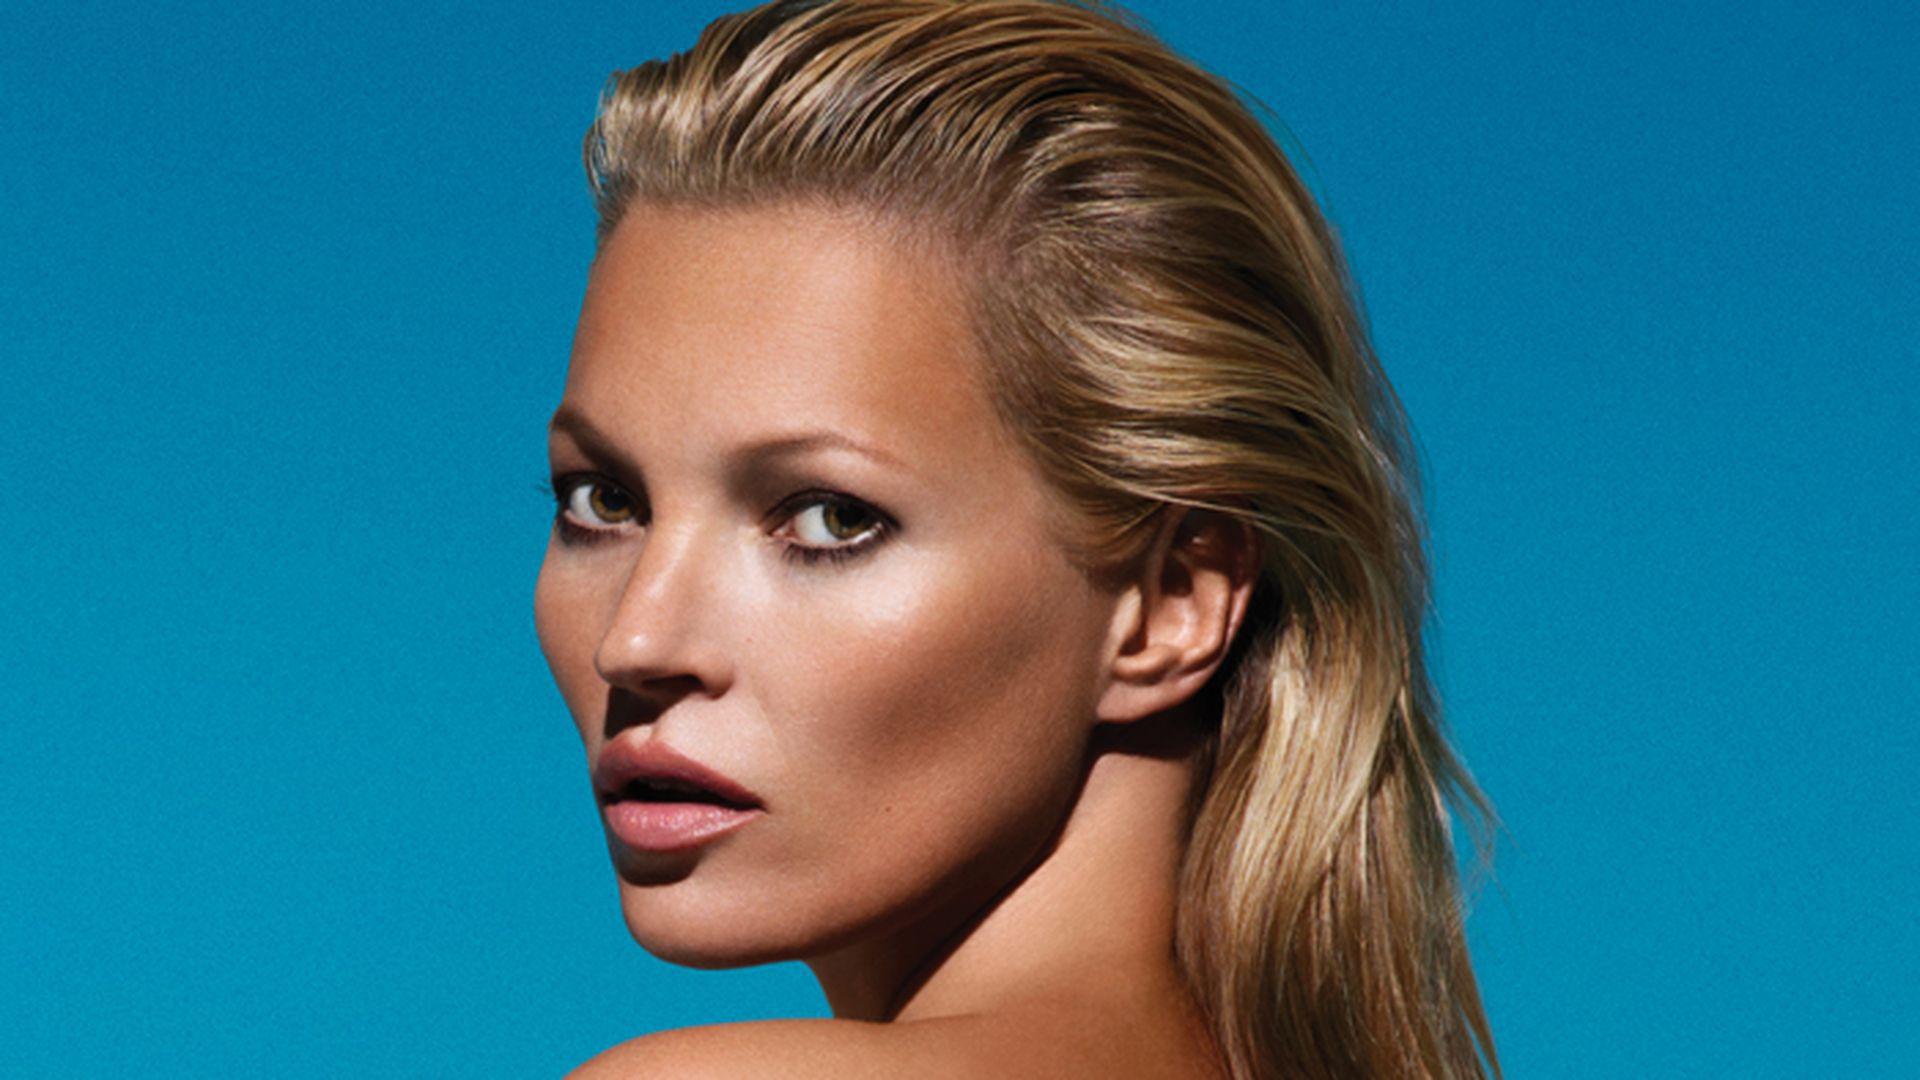 Kate Moss New Images Wallpapers